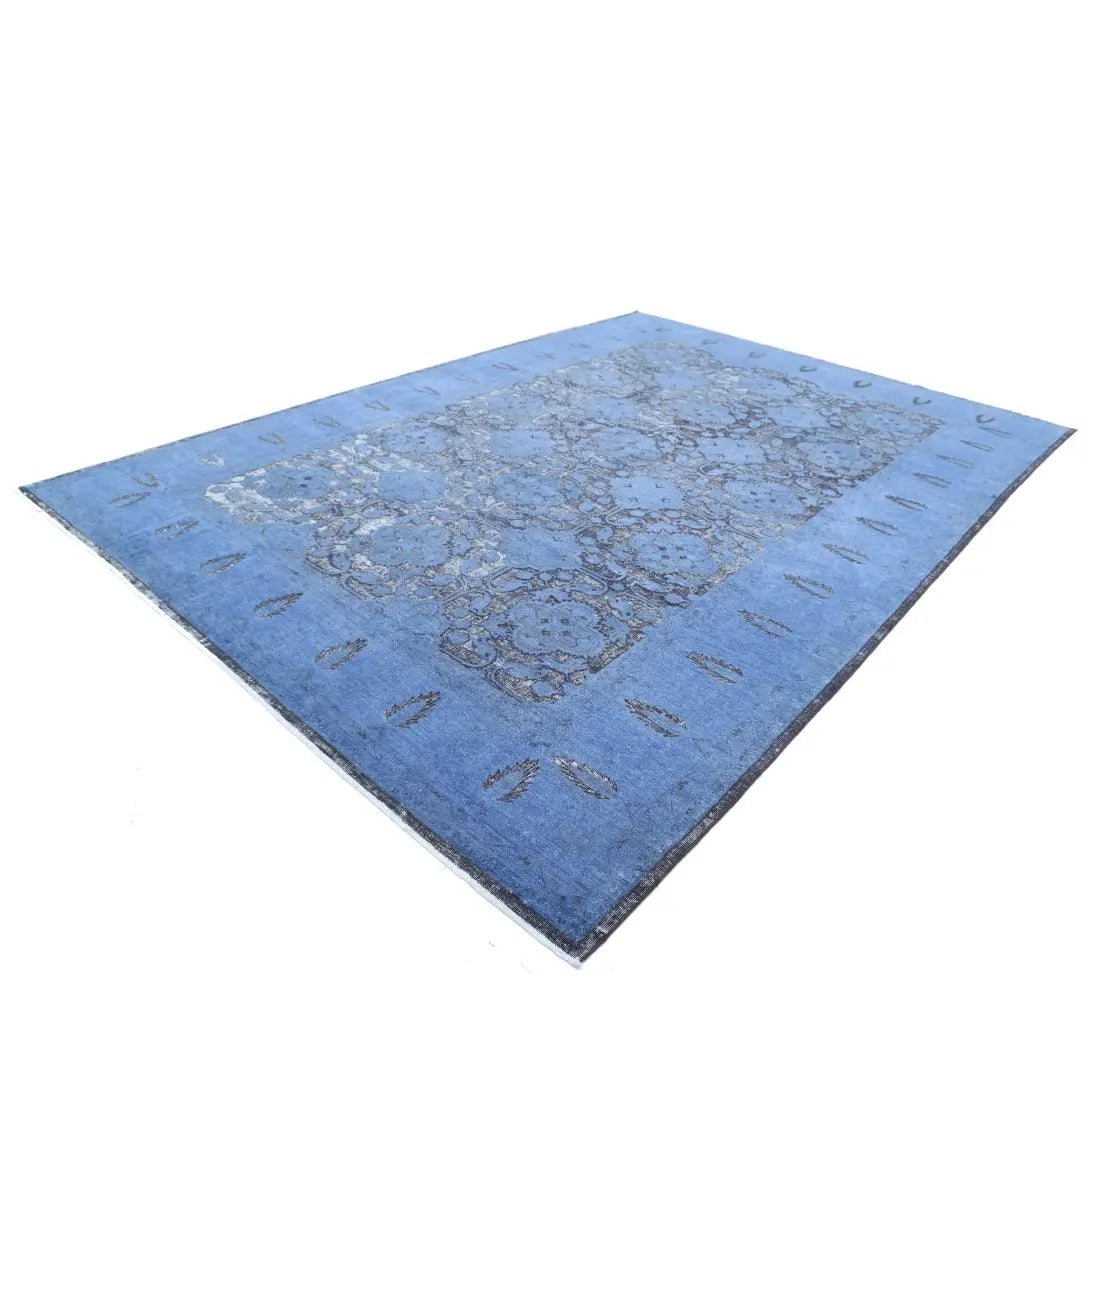 Hand Knotted Onyx Wool Rug - 9'6'' x 13'6''